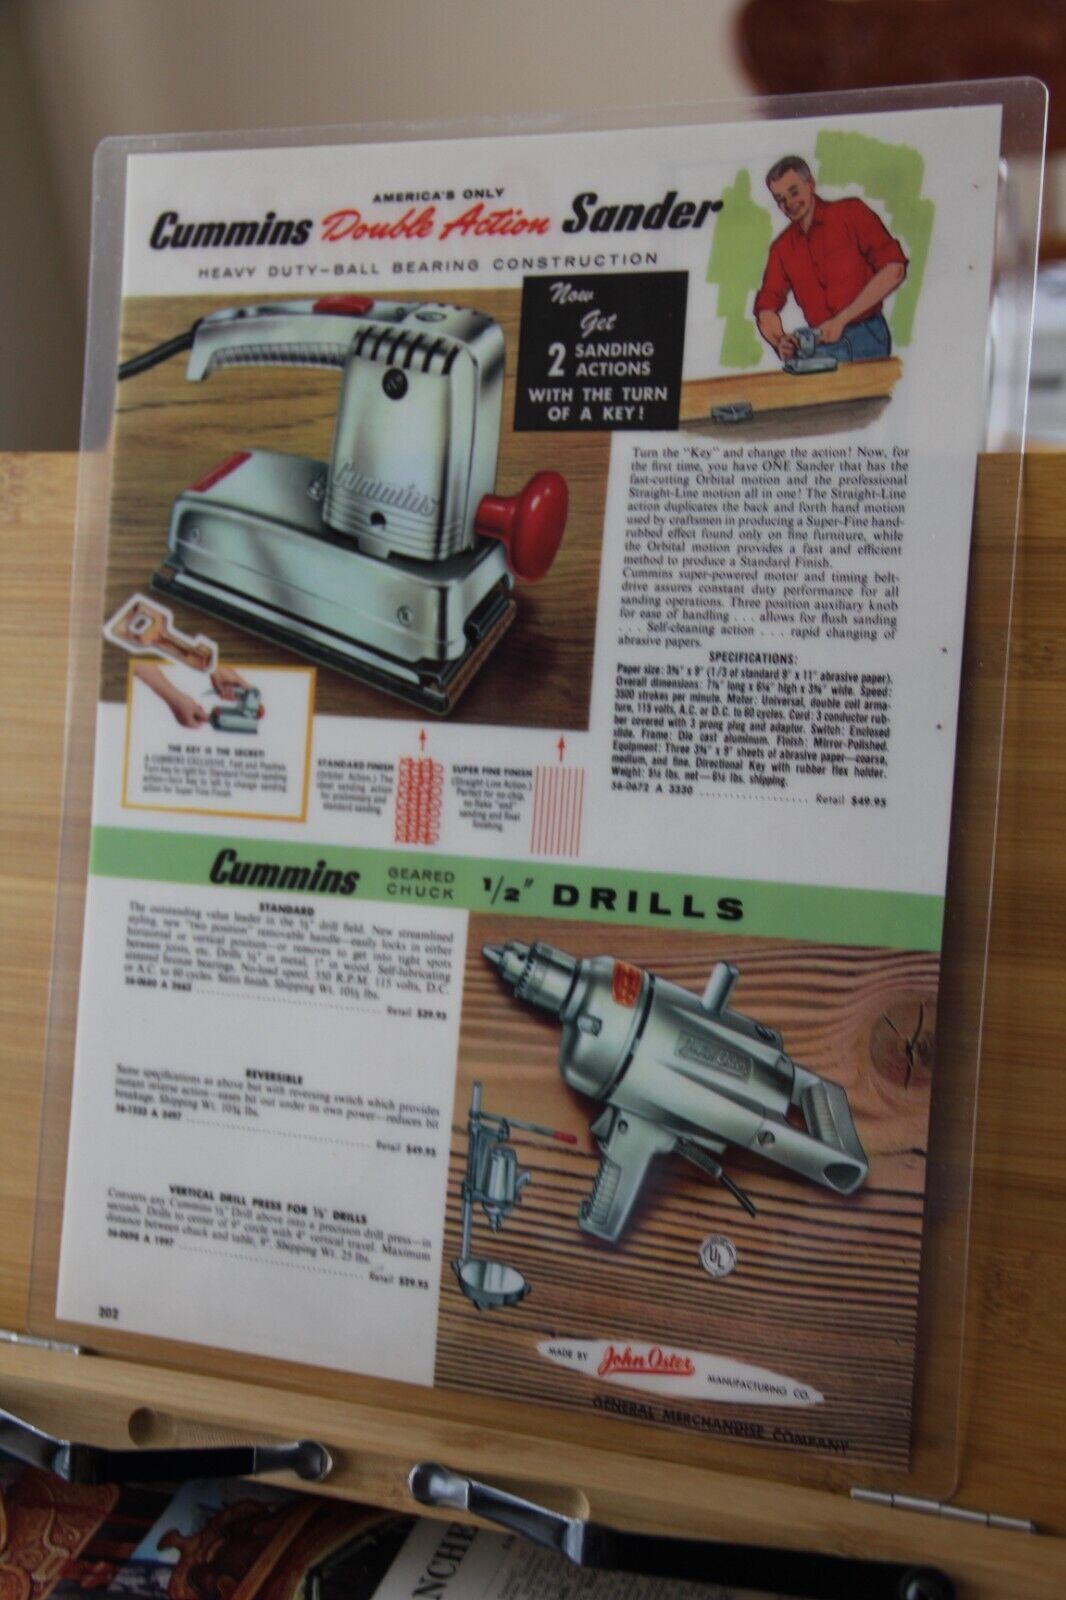 Cummins Maxaw Saw Drill sander   Laminated Ad Placemat Vintage 1950s